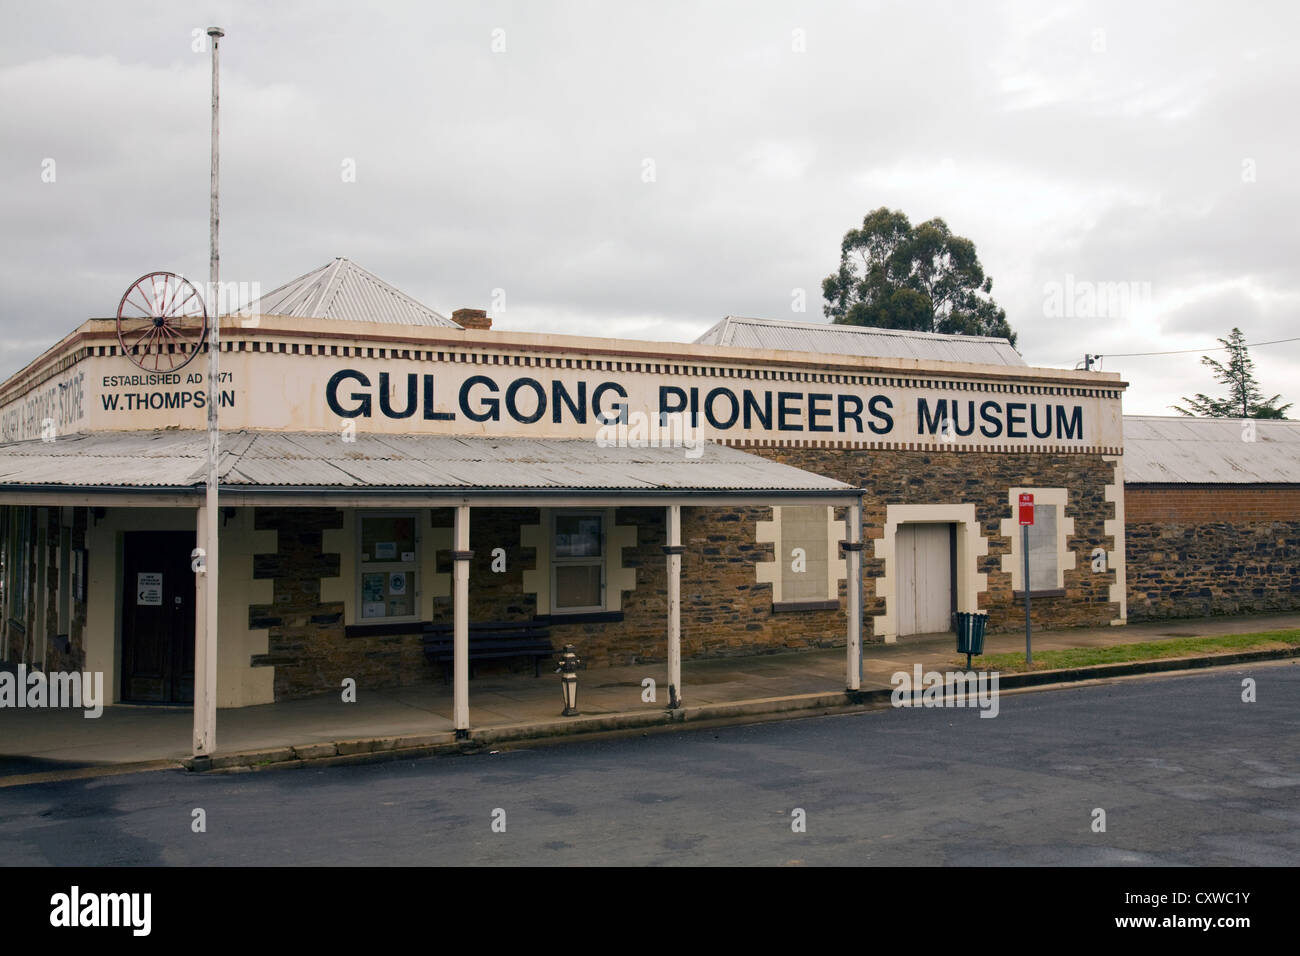 Gulgong pioneers museum,former gold mining town in regional new south wales,Australia Stock Photo